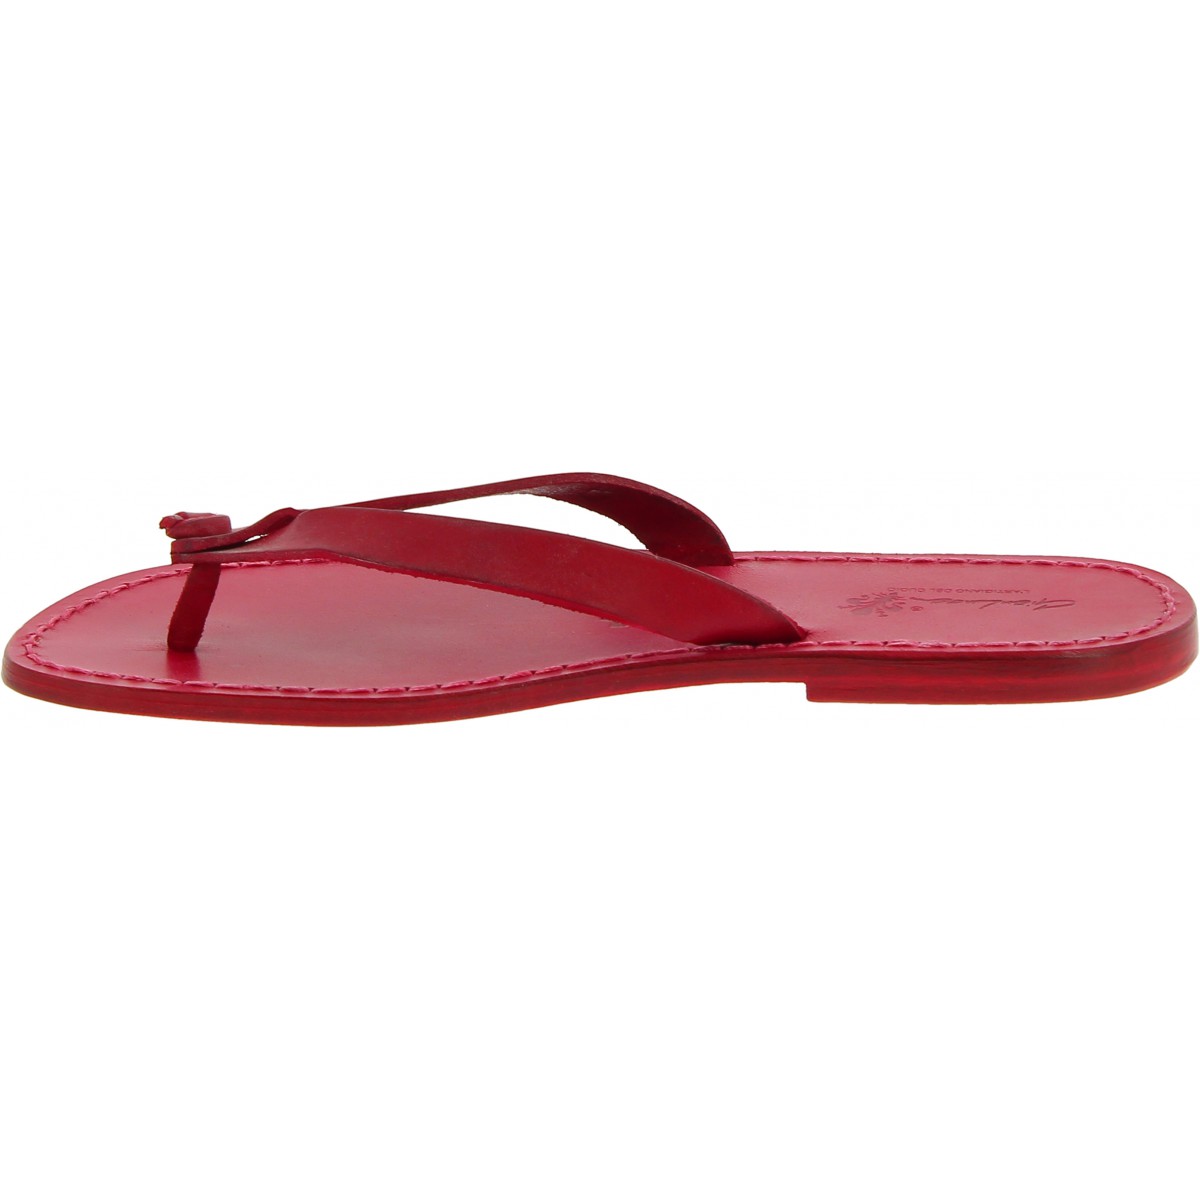 Red leather thongs sandals for men Handmade | The leather craftsmen